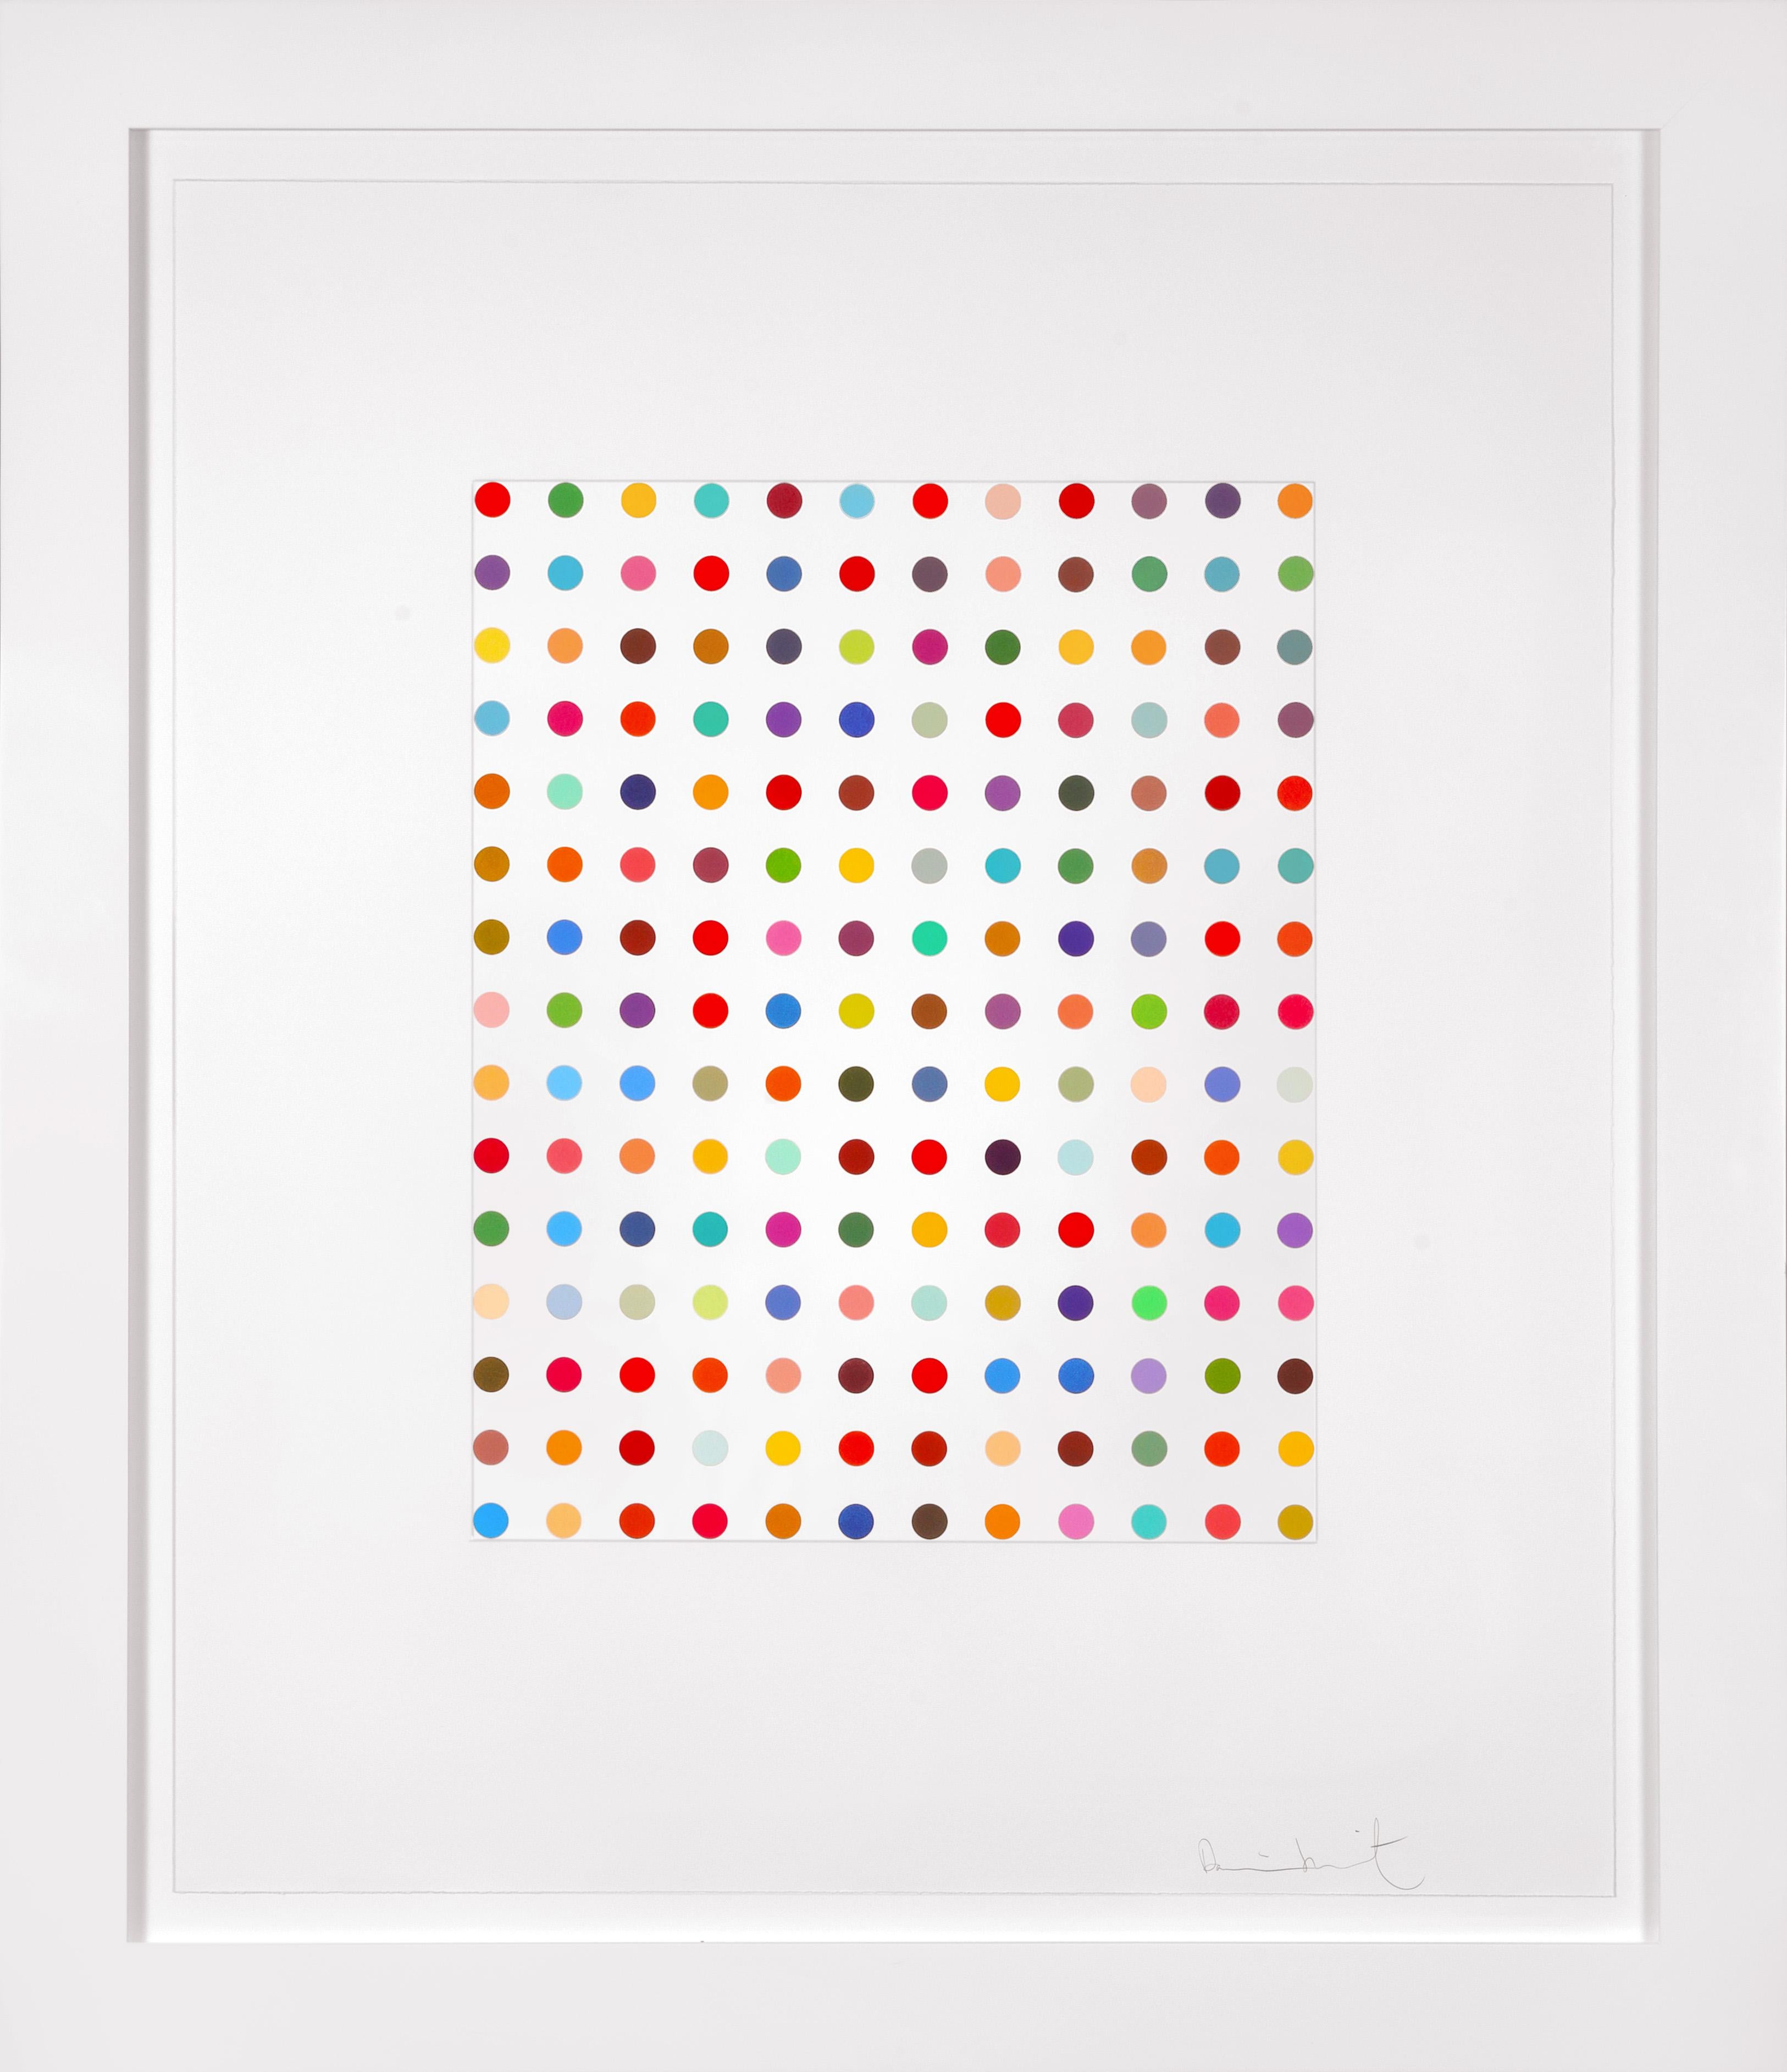 Damien Hirst 'Ethidium Bromide Aqueous Solution' Spots Etching, 2005. Signed by the Artist on front. Edition of 65. Published by the Paragon Press, 2005. 

The iconic 'Spot Series' is one of Hirst's most recognizable themes, as the universally